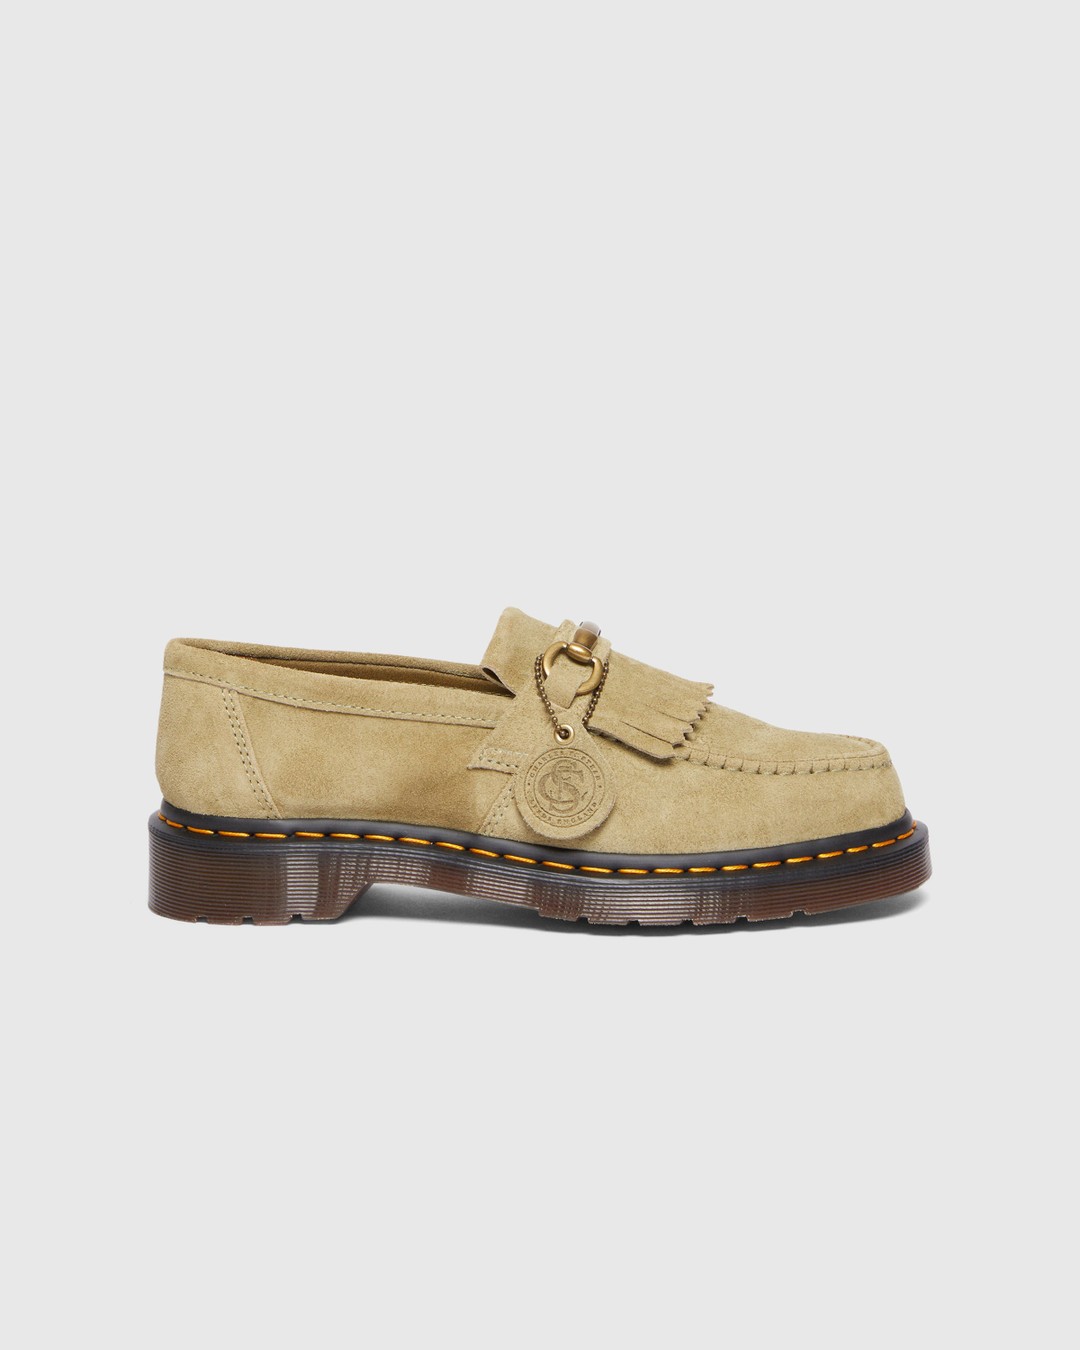 Dr. Martens – Adrian Snaffle Westminster Suede Pale Green - Shoes - Green - Image 1